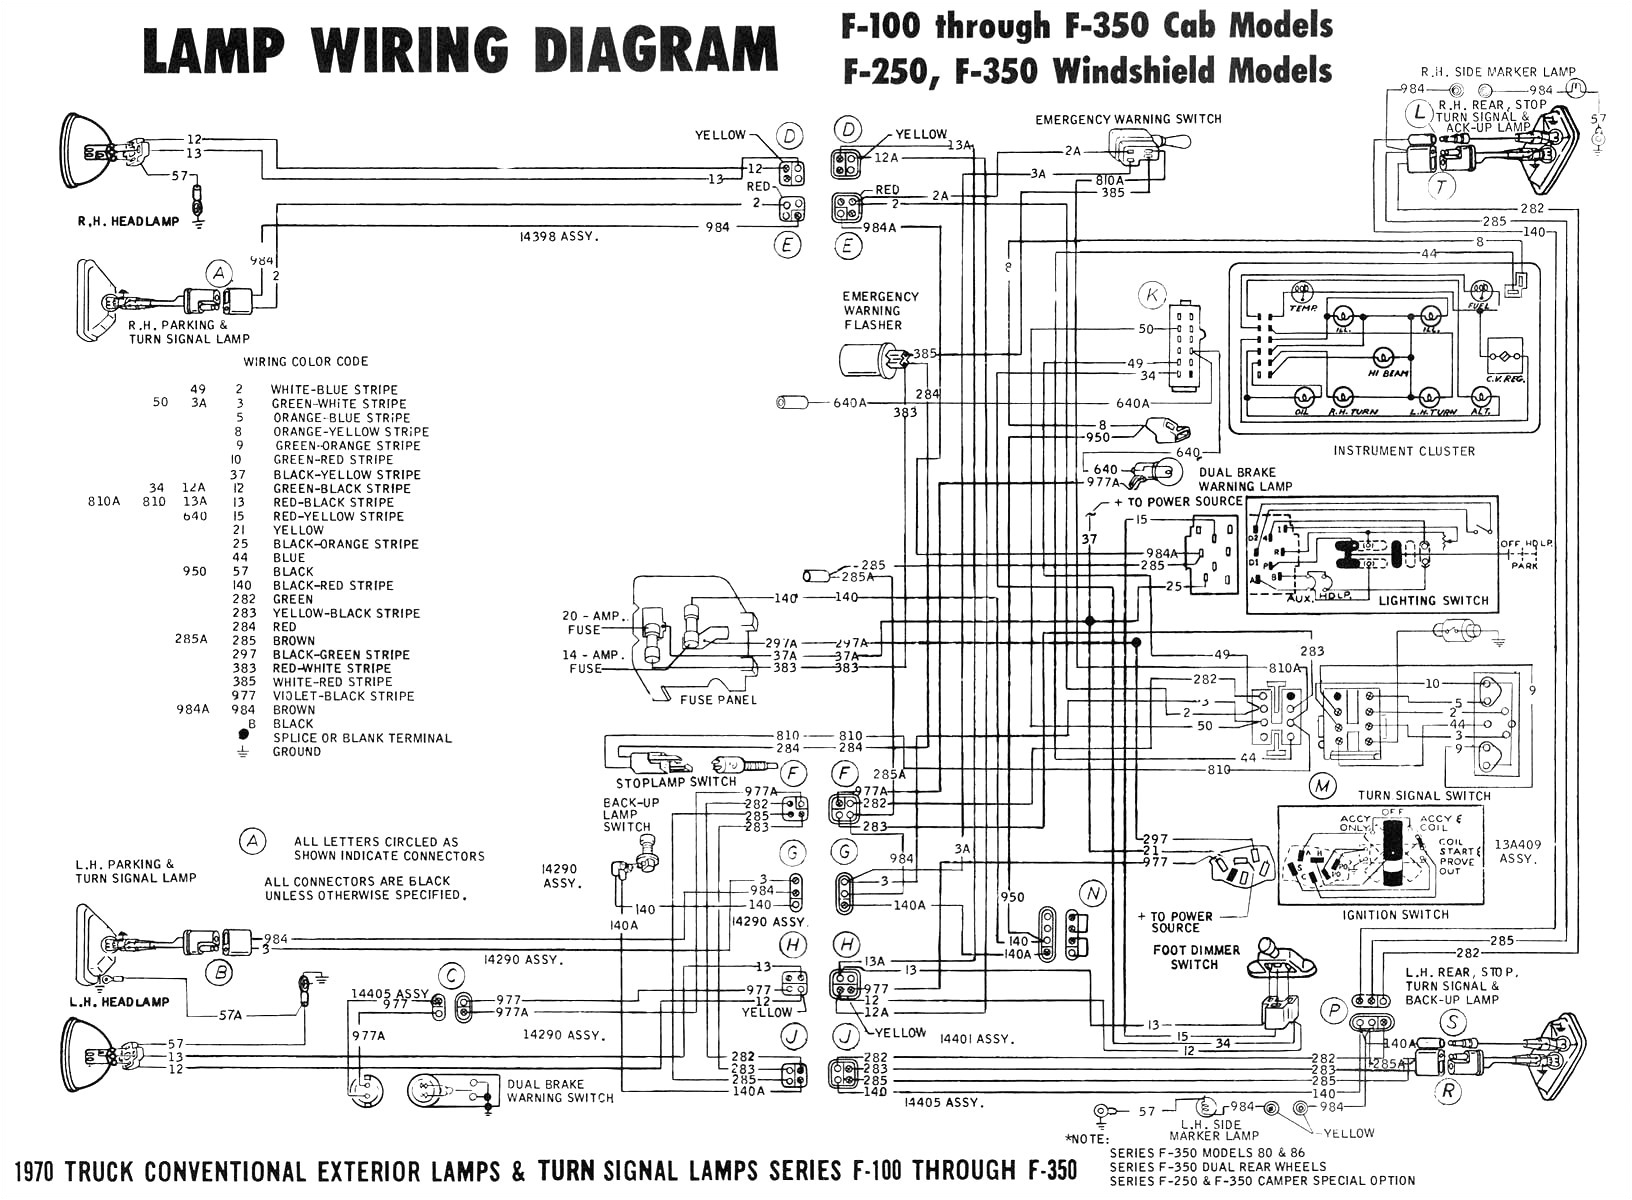 fuse box diagram ford 2005 f250 tail lights wiring diagram files fuse box diagram ford 2005 f250 tail lights